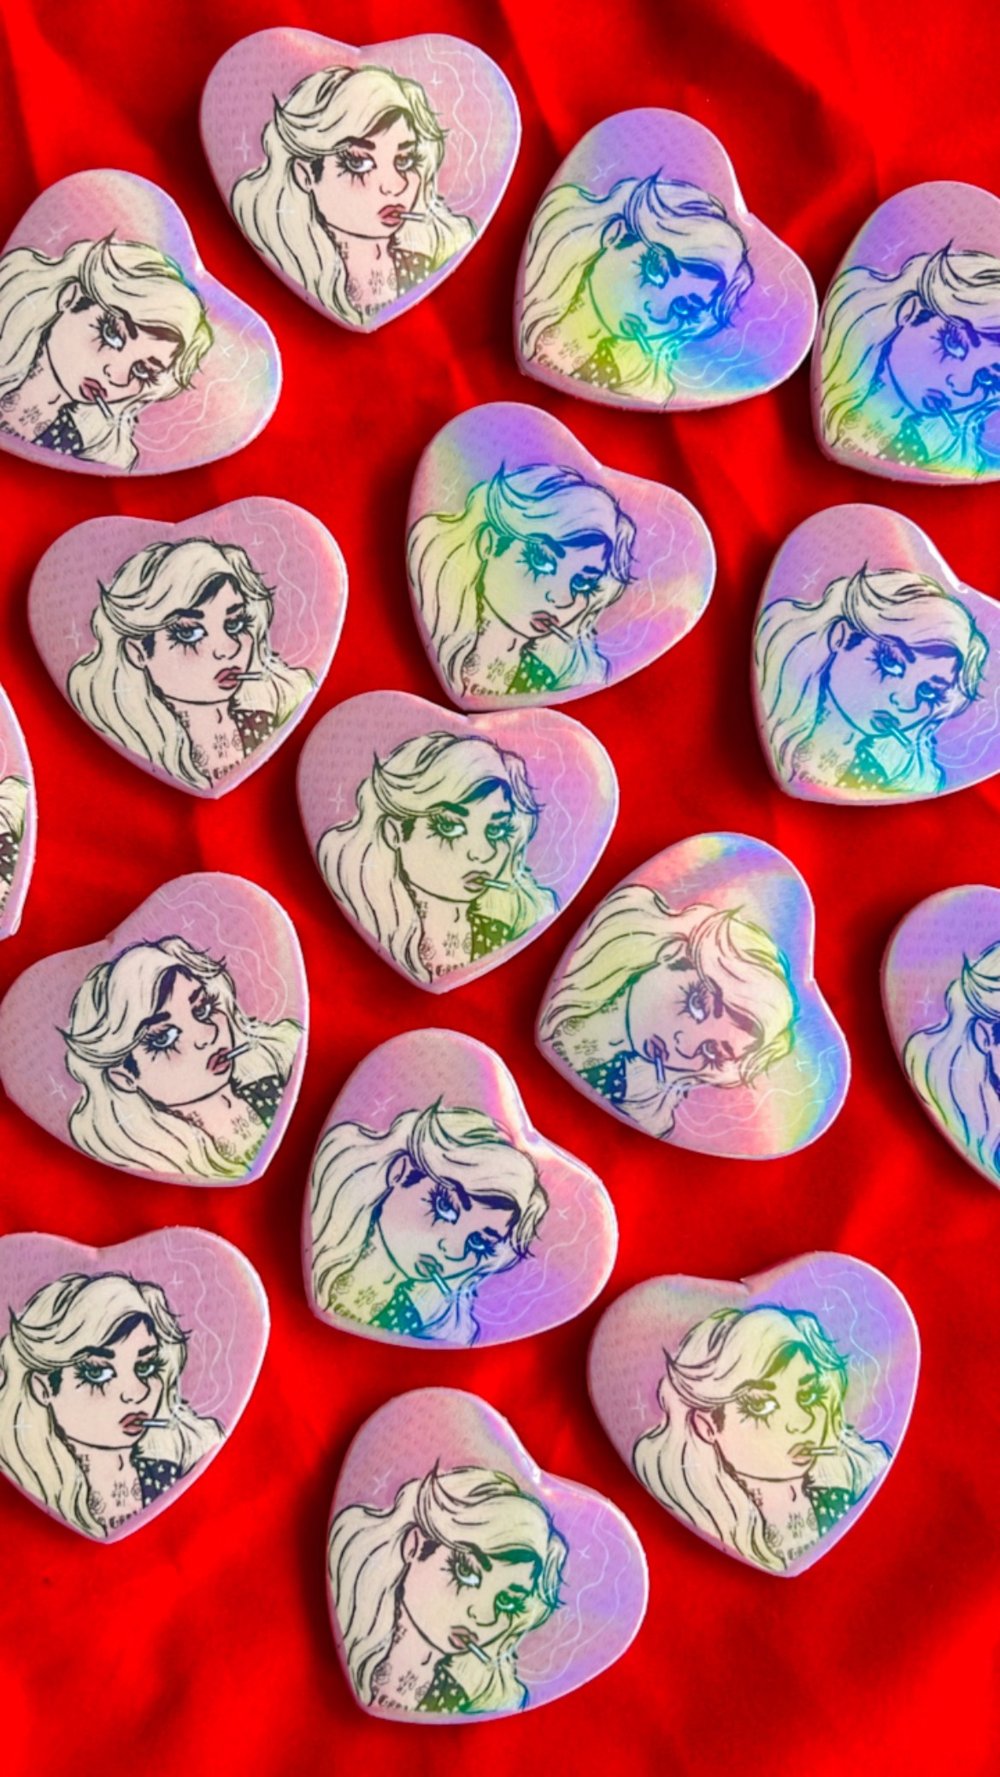 FRAN holographic heart badge